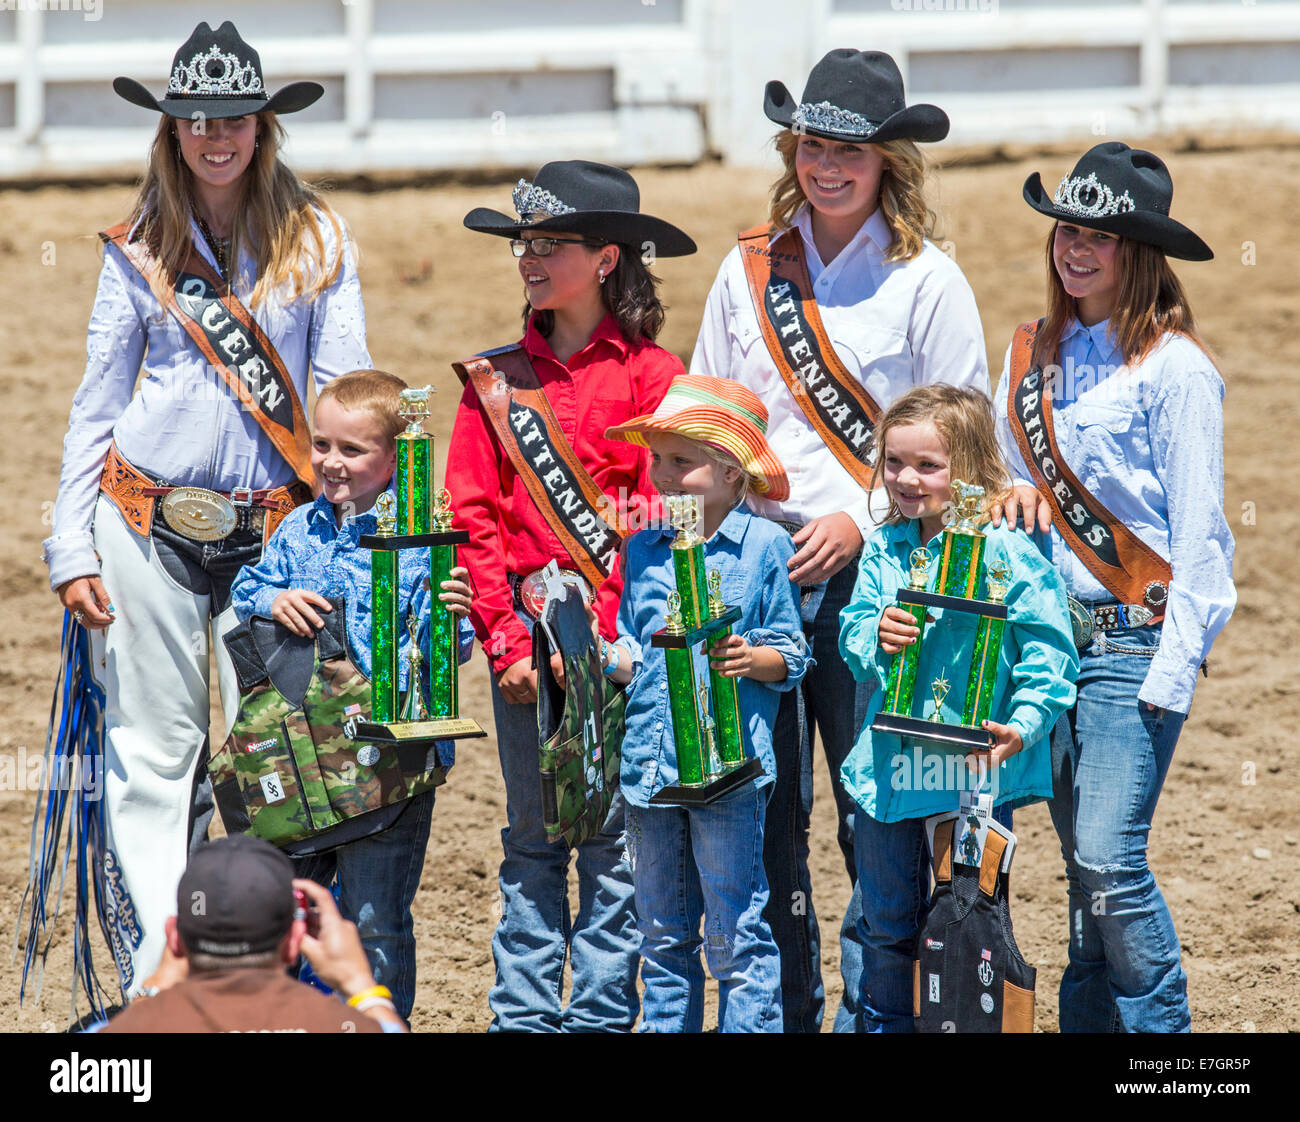 Young winners in the mutton busting competition event, Chaffee County Fair & Rodeo Stock Photo